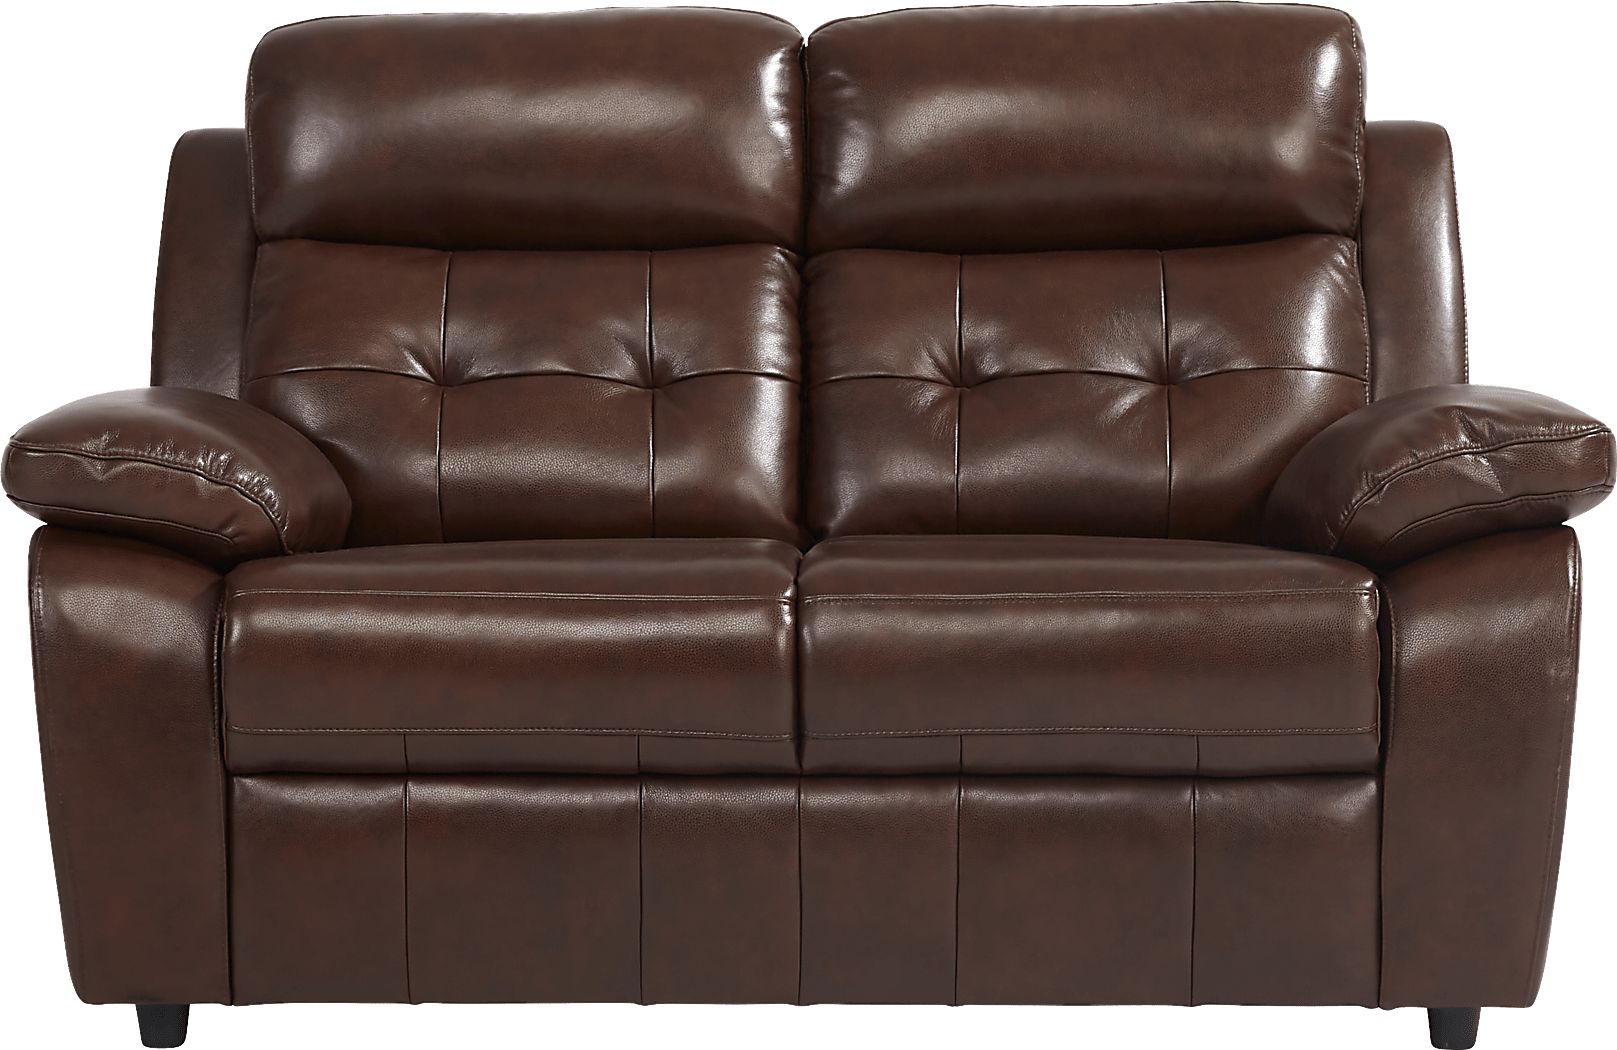 Antonin Brown Leather 2 Pc Living Room with Reclining Sofa